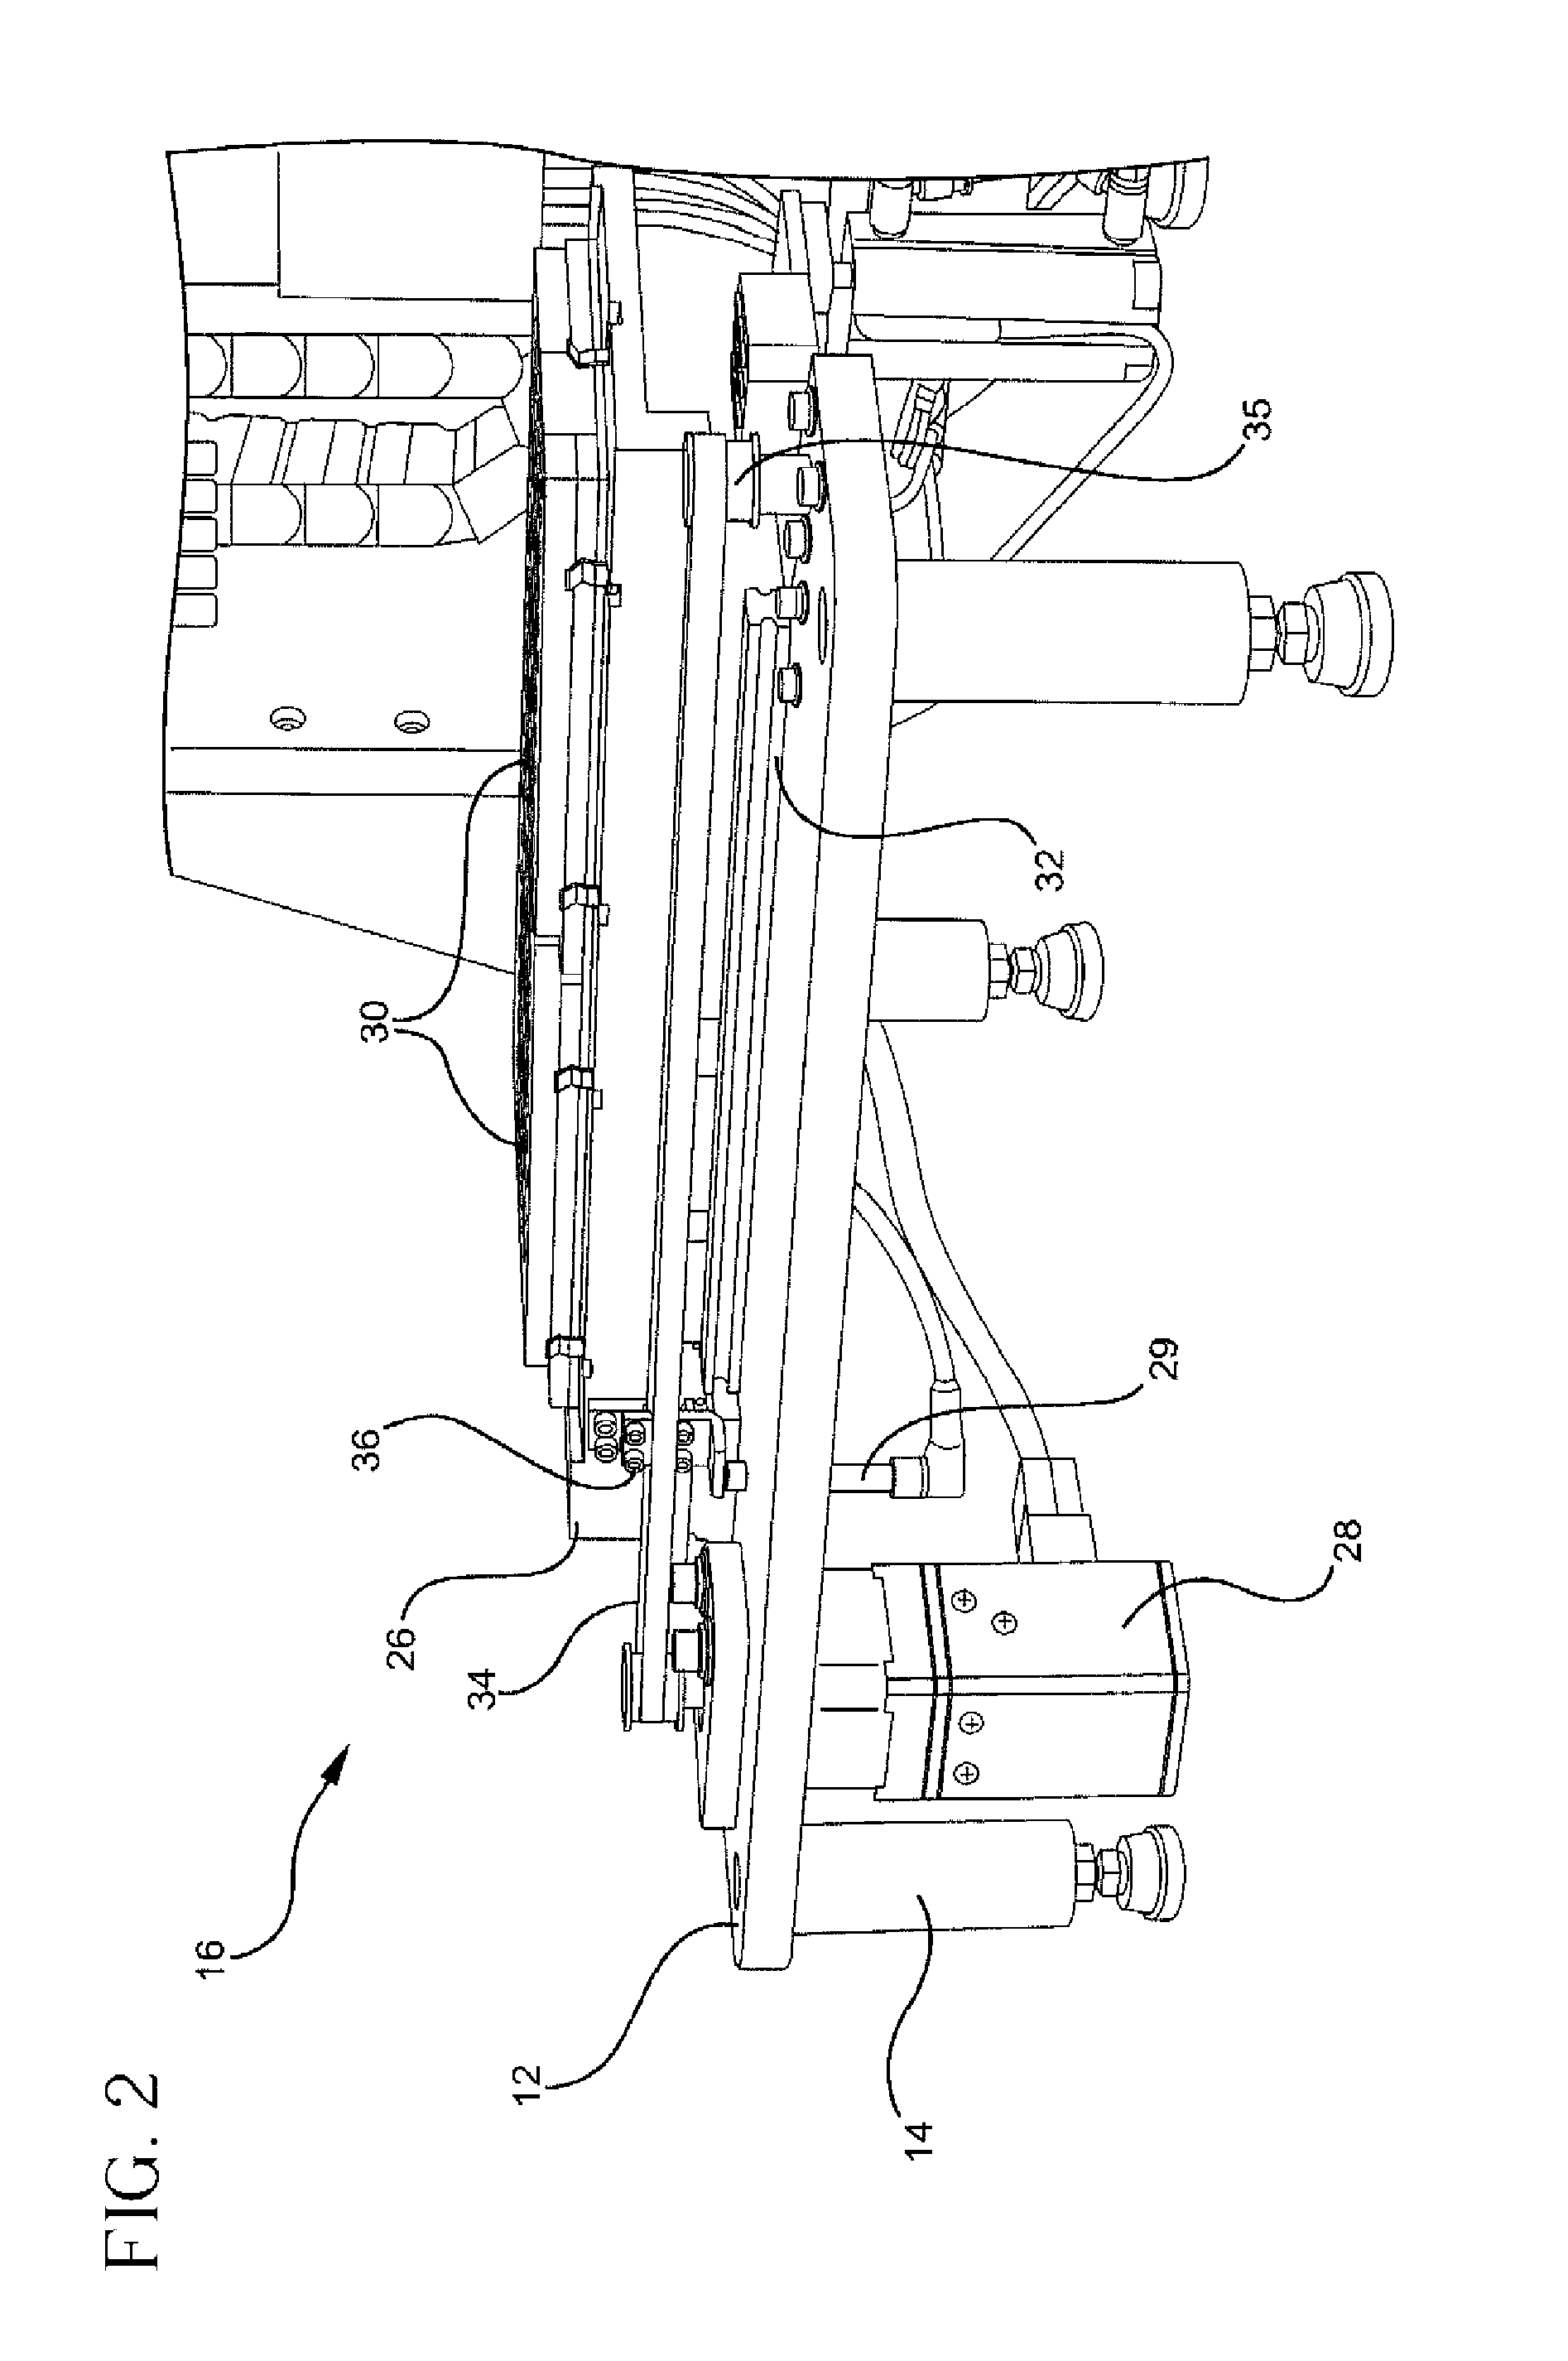 Apparatus for transferring samples from source vessels to target vessels